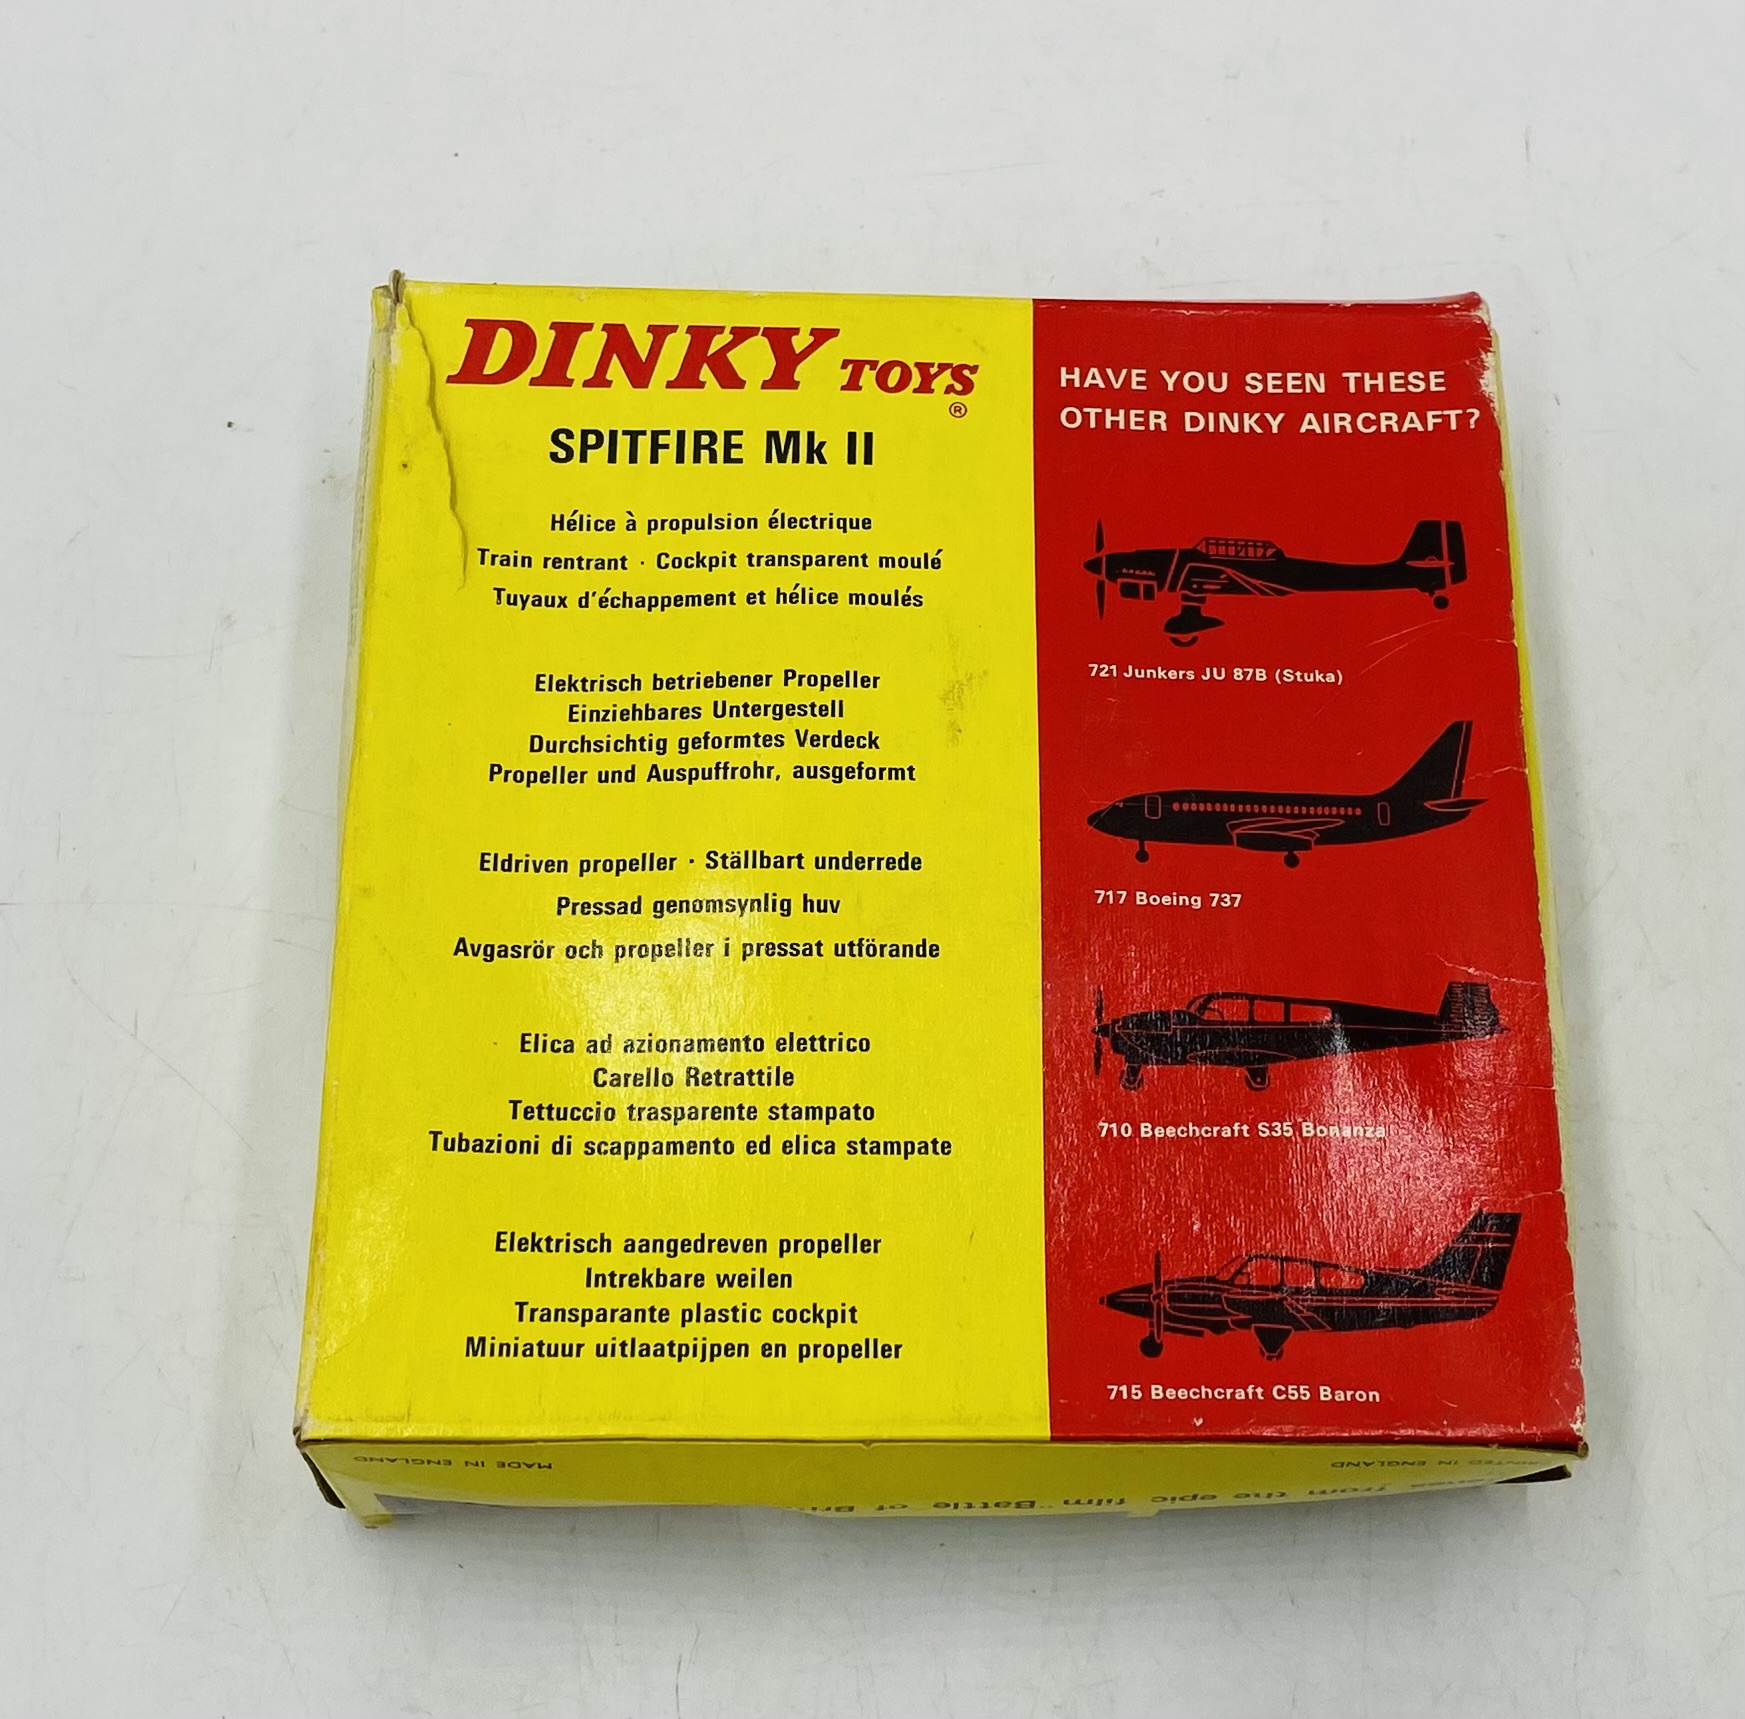 A vintage boxed Dinky Toys "Battle of Britain" Spitfire Mk II die-cast model (No 719) - Image 7 of 7